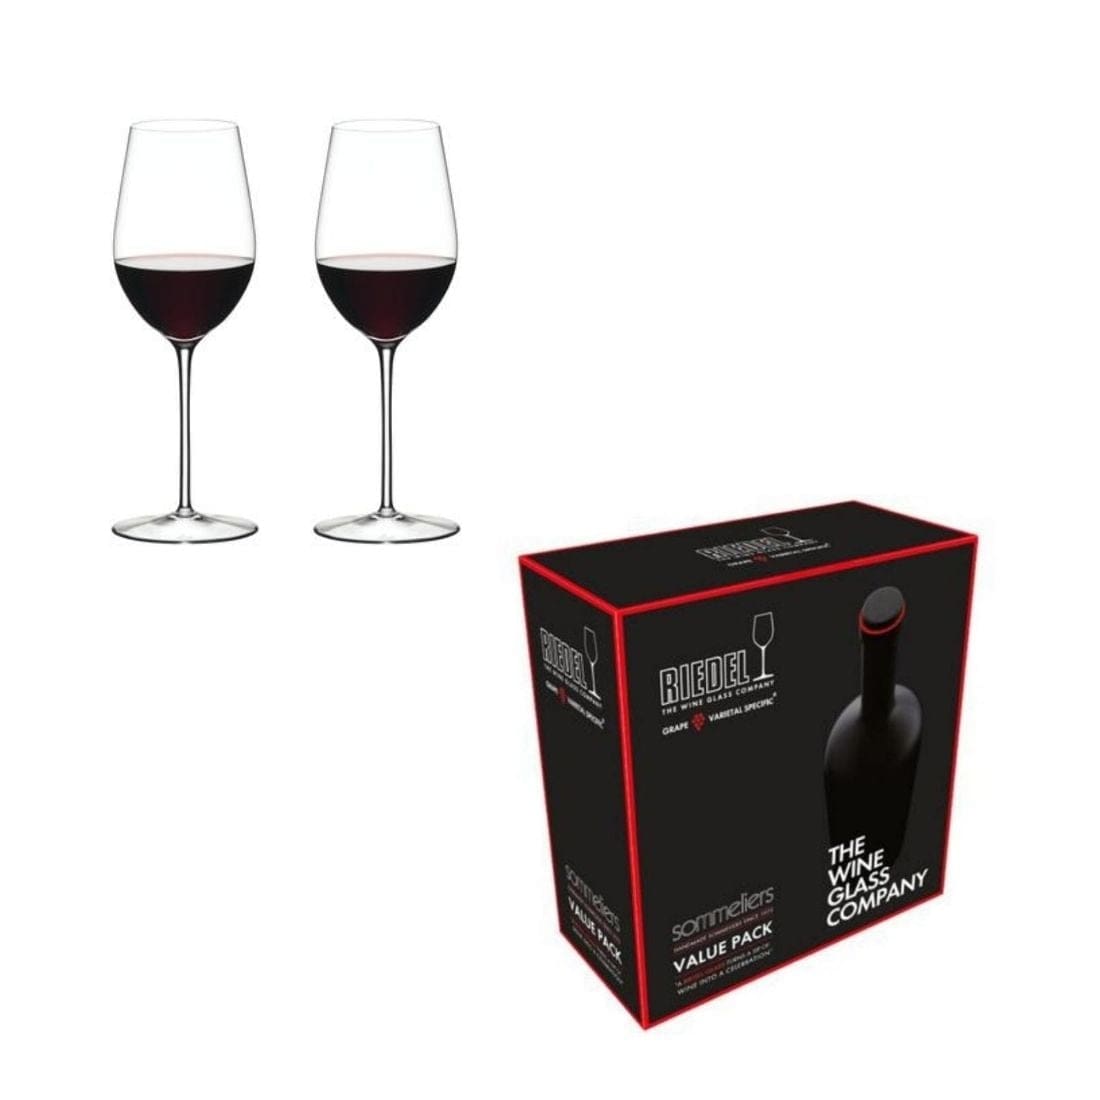 Riedel Sommeliers - Riesling Grand Cru Value Gift Pack (2 Glasses)